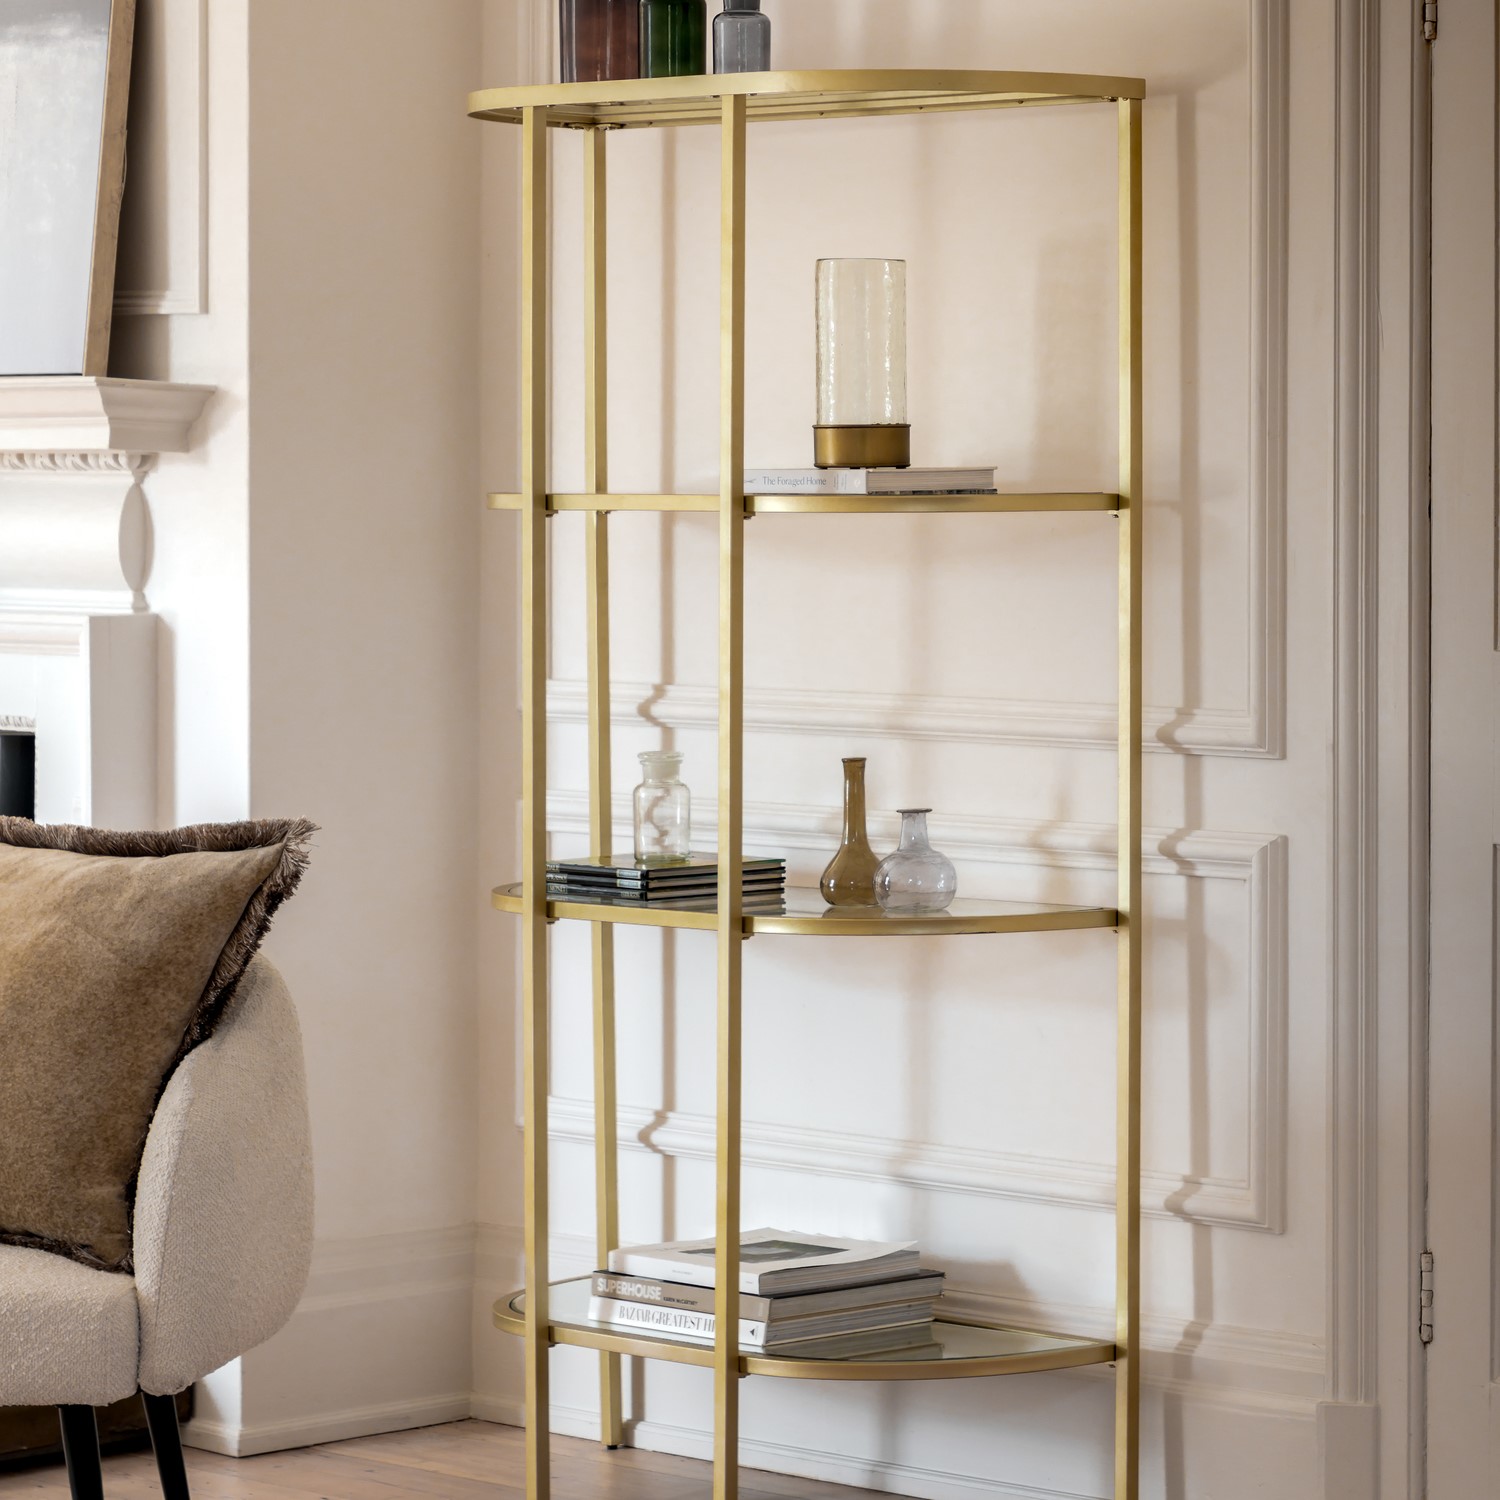 Read more about Hudson glass bookcase in champagne caspian house